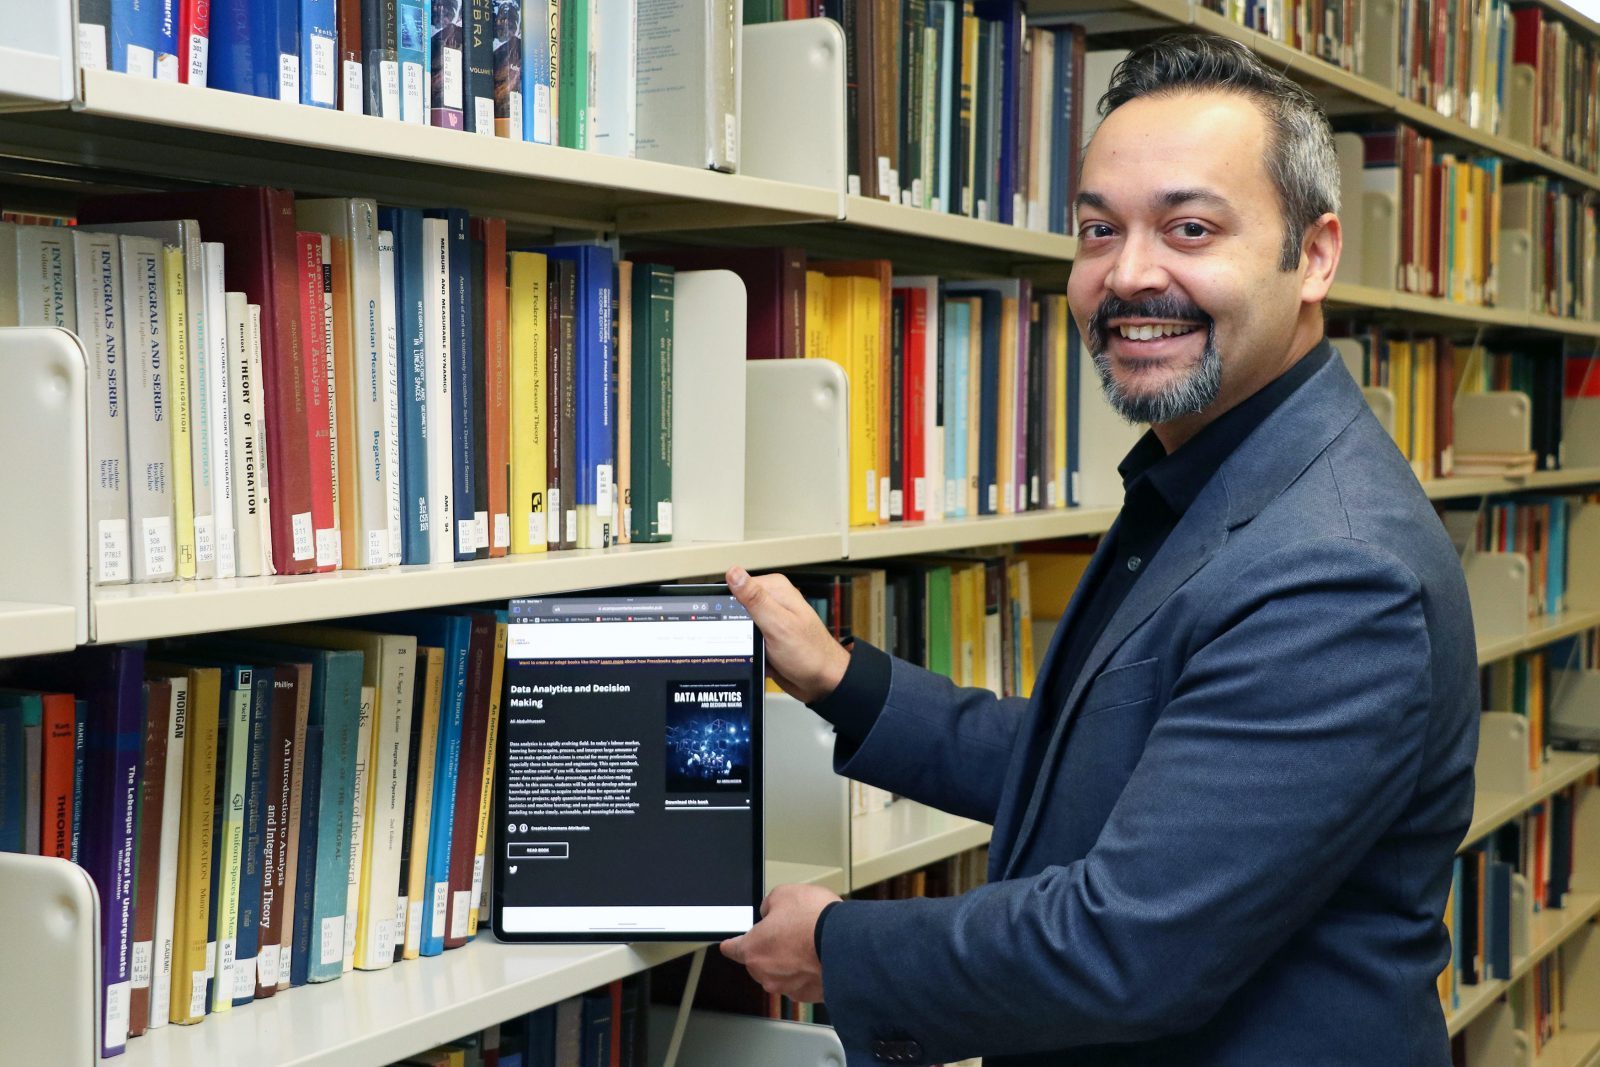 A man stands in a row of books in a library while holding a digital tablet.